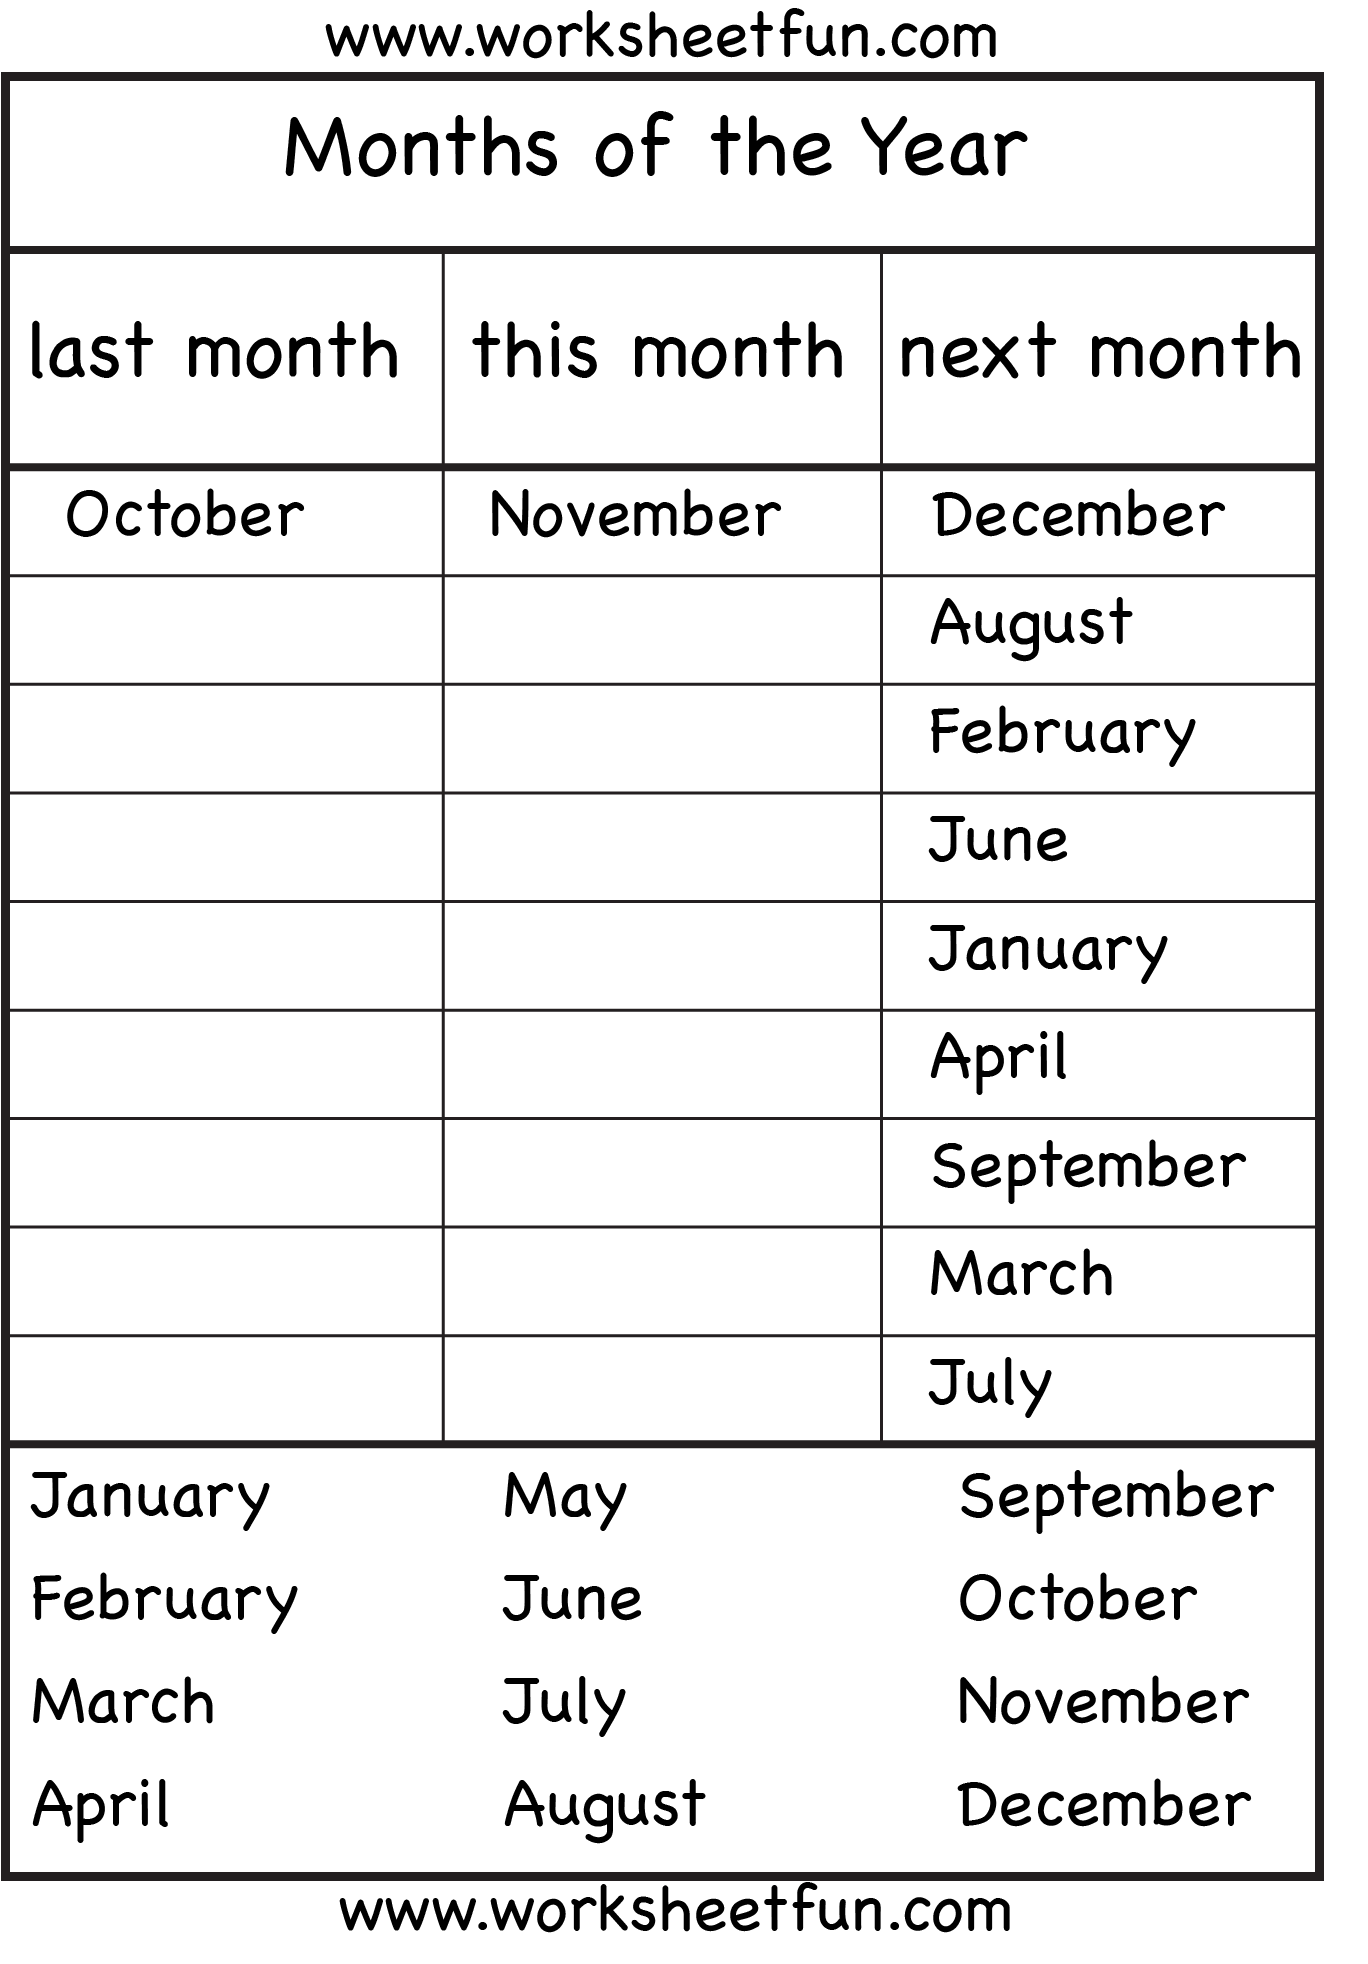 months-of-the-year-worksheets-months-of-the-year-worksheet-for-grade-4